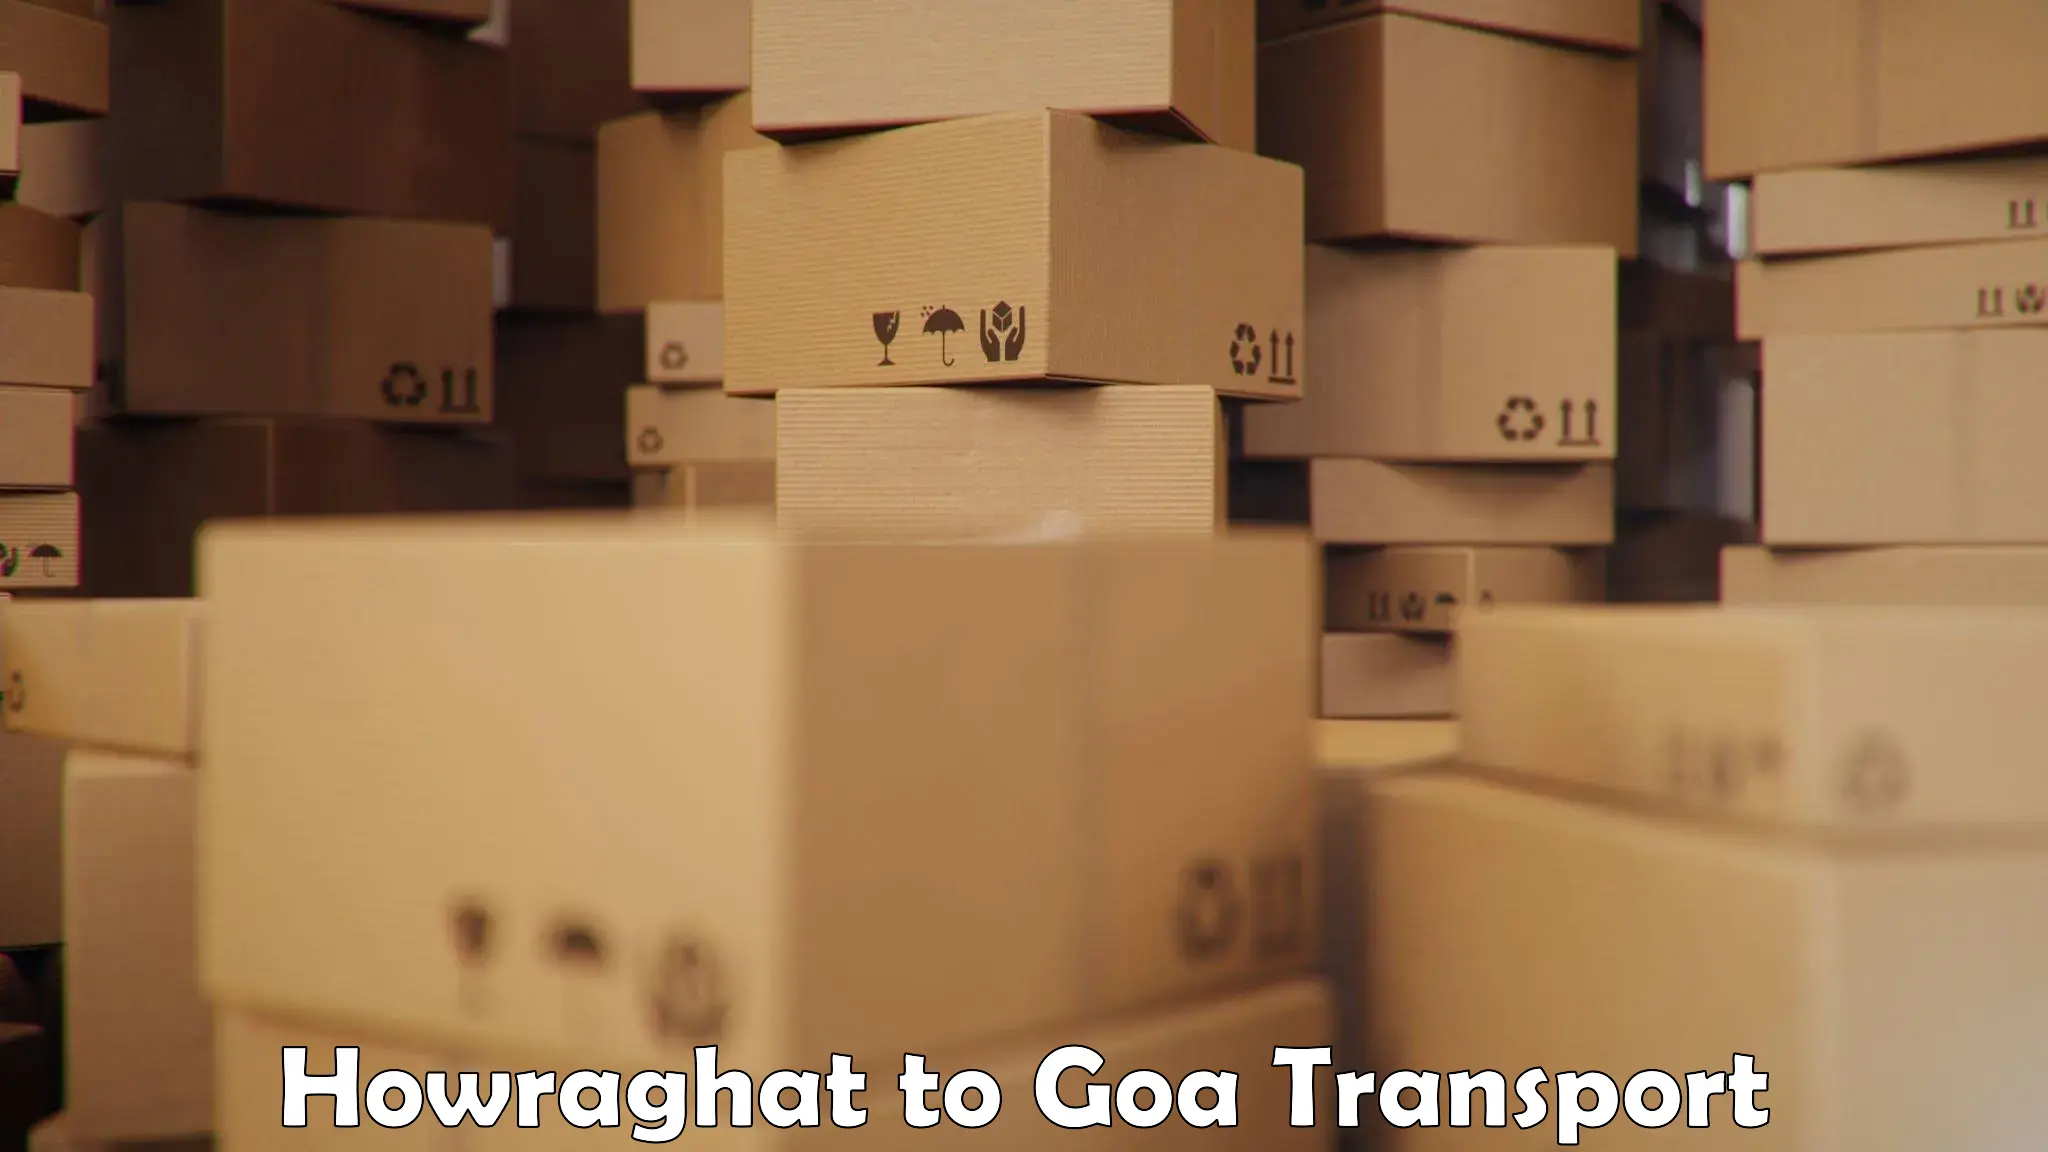 Domestic goods transportation services Howraghat to Panjim